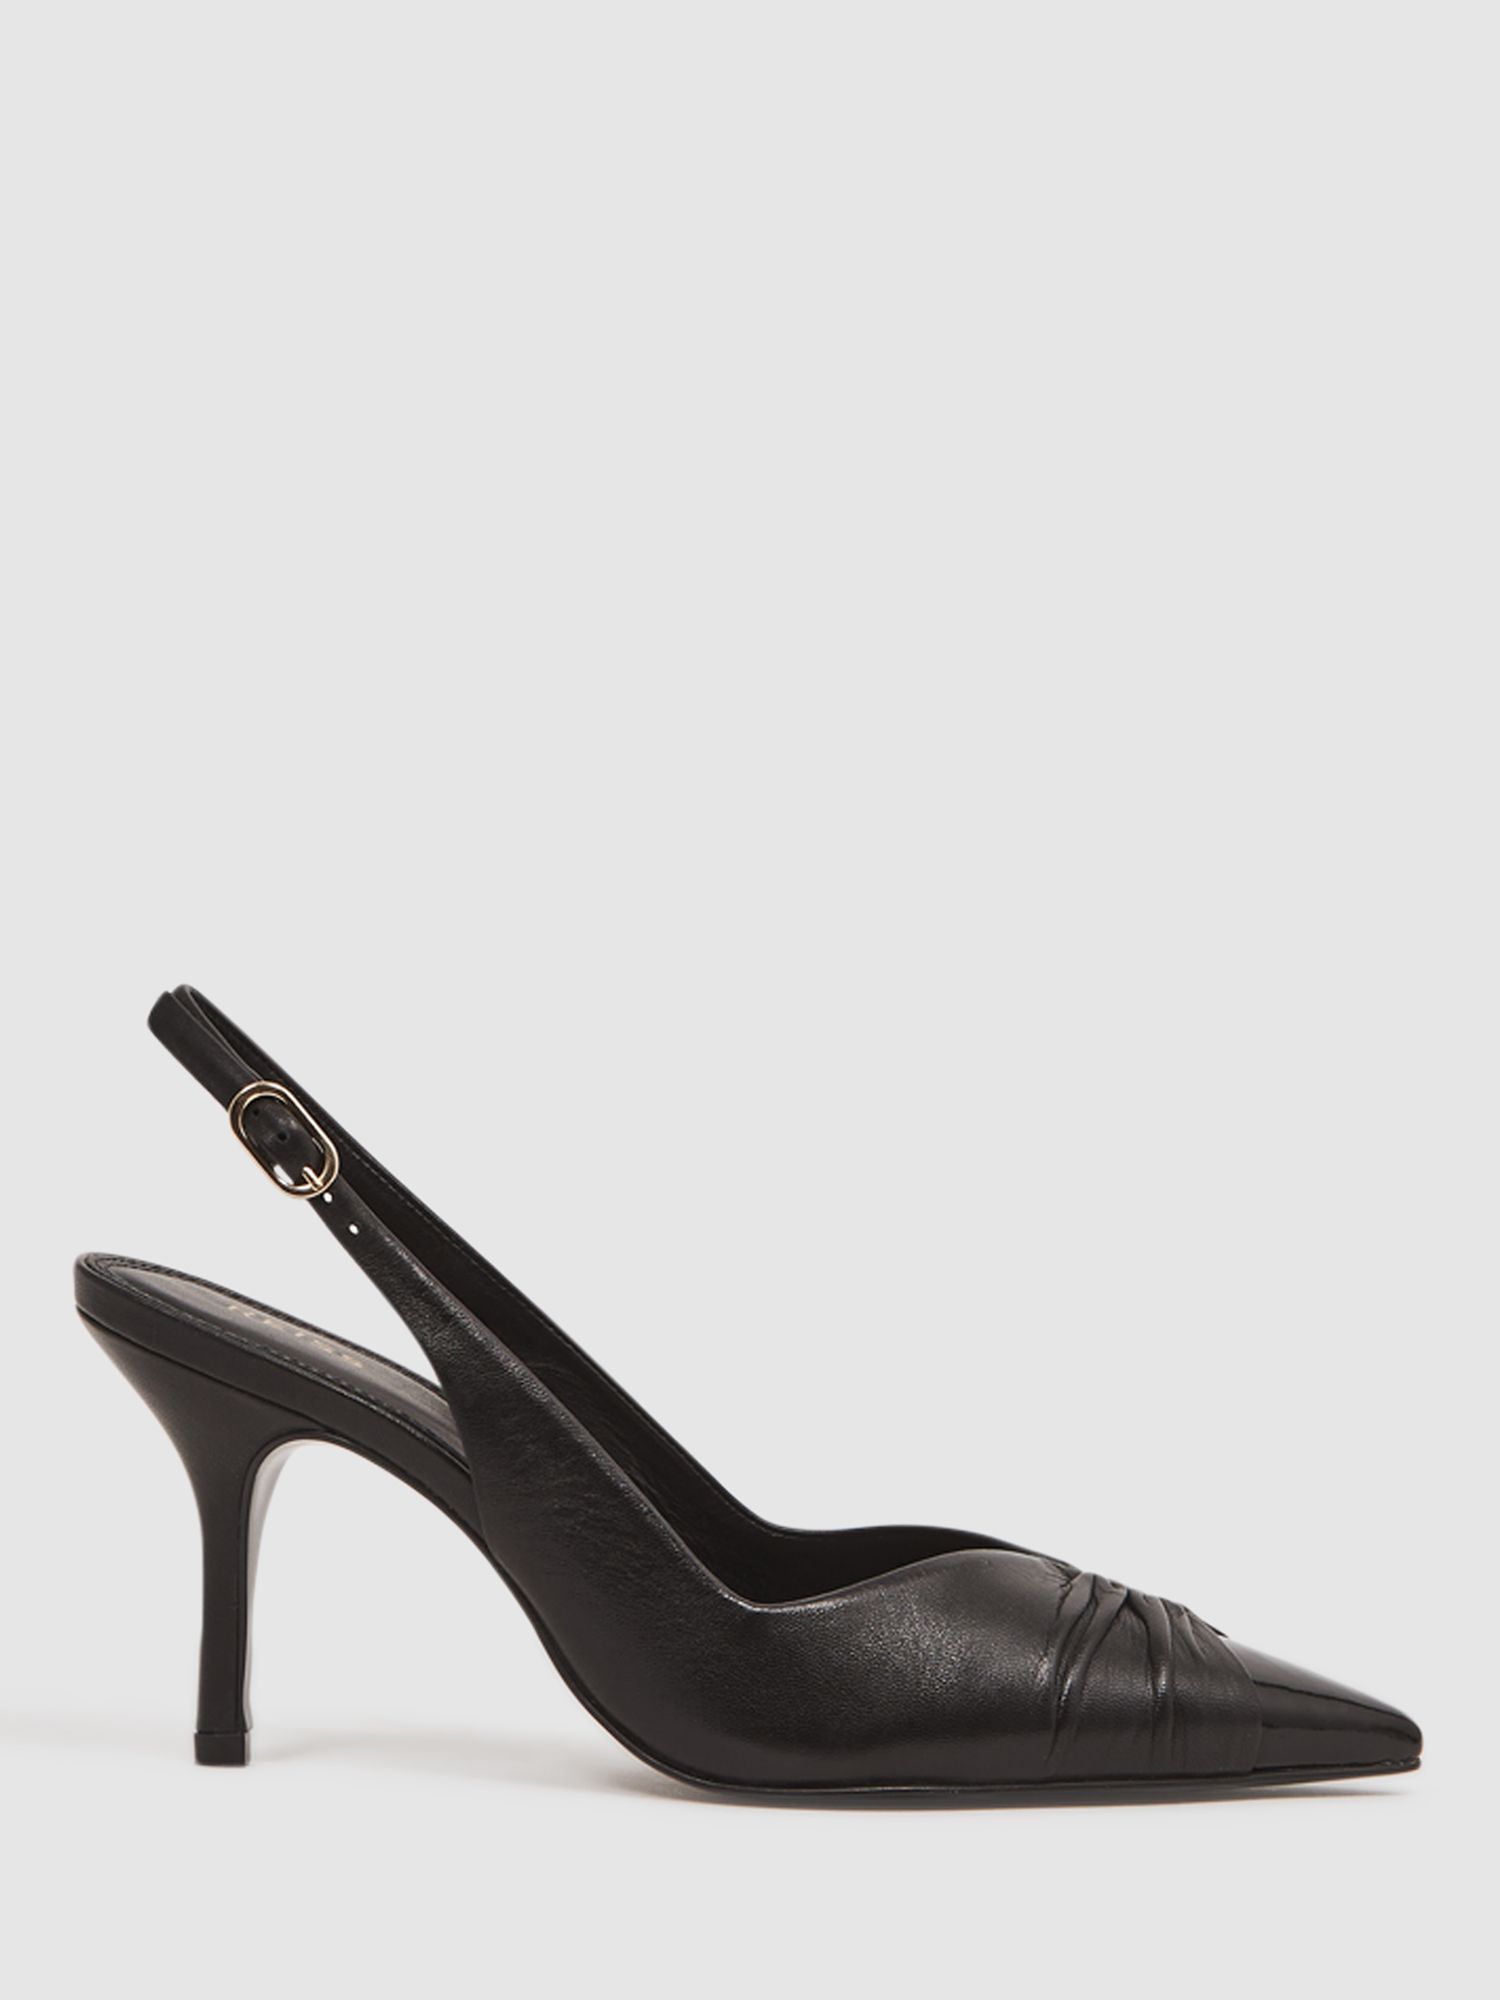 Reiss Delilah Leather Slingback Court Shoes